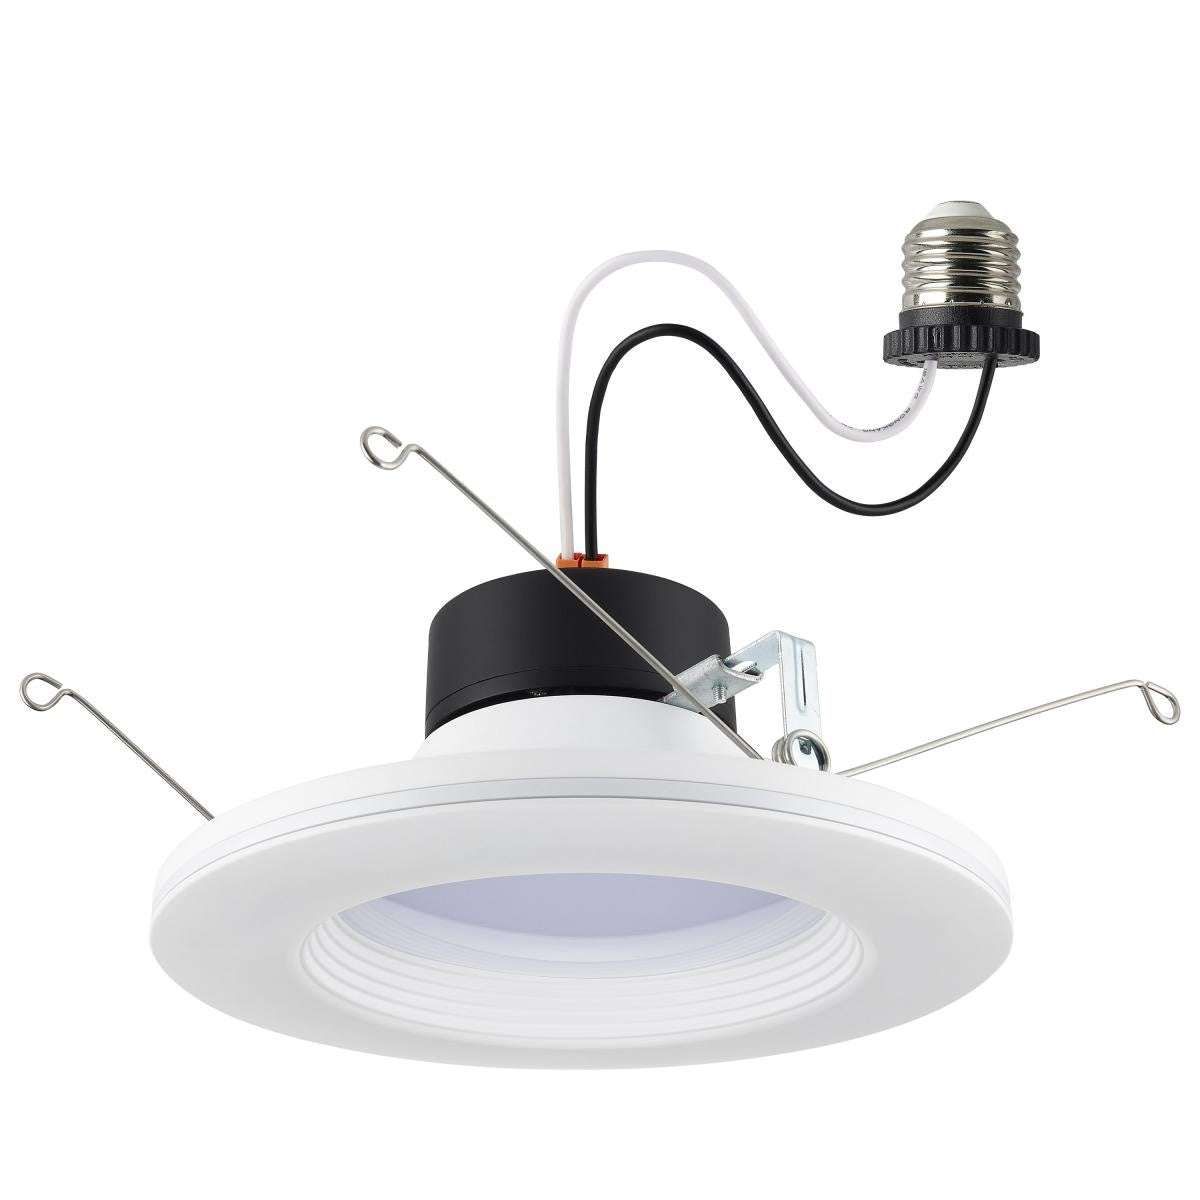 6 In. Recessed LED Can Light, 9 Watt, 800 Lumens, Selectable CCT, 2700K to 5000K, Baffle Trim with Night Light